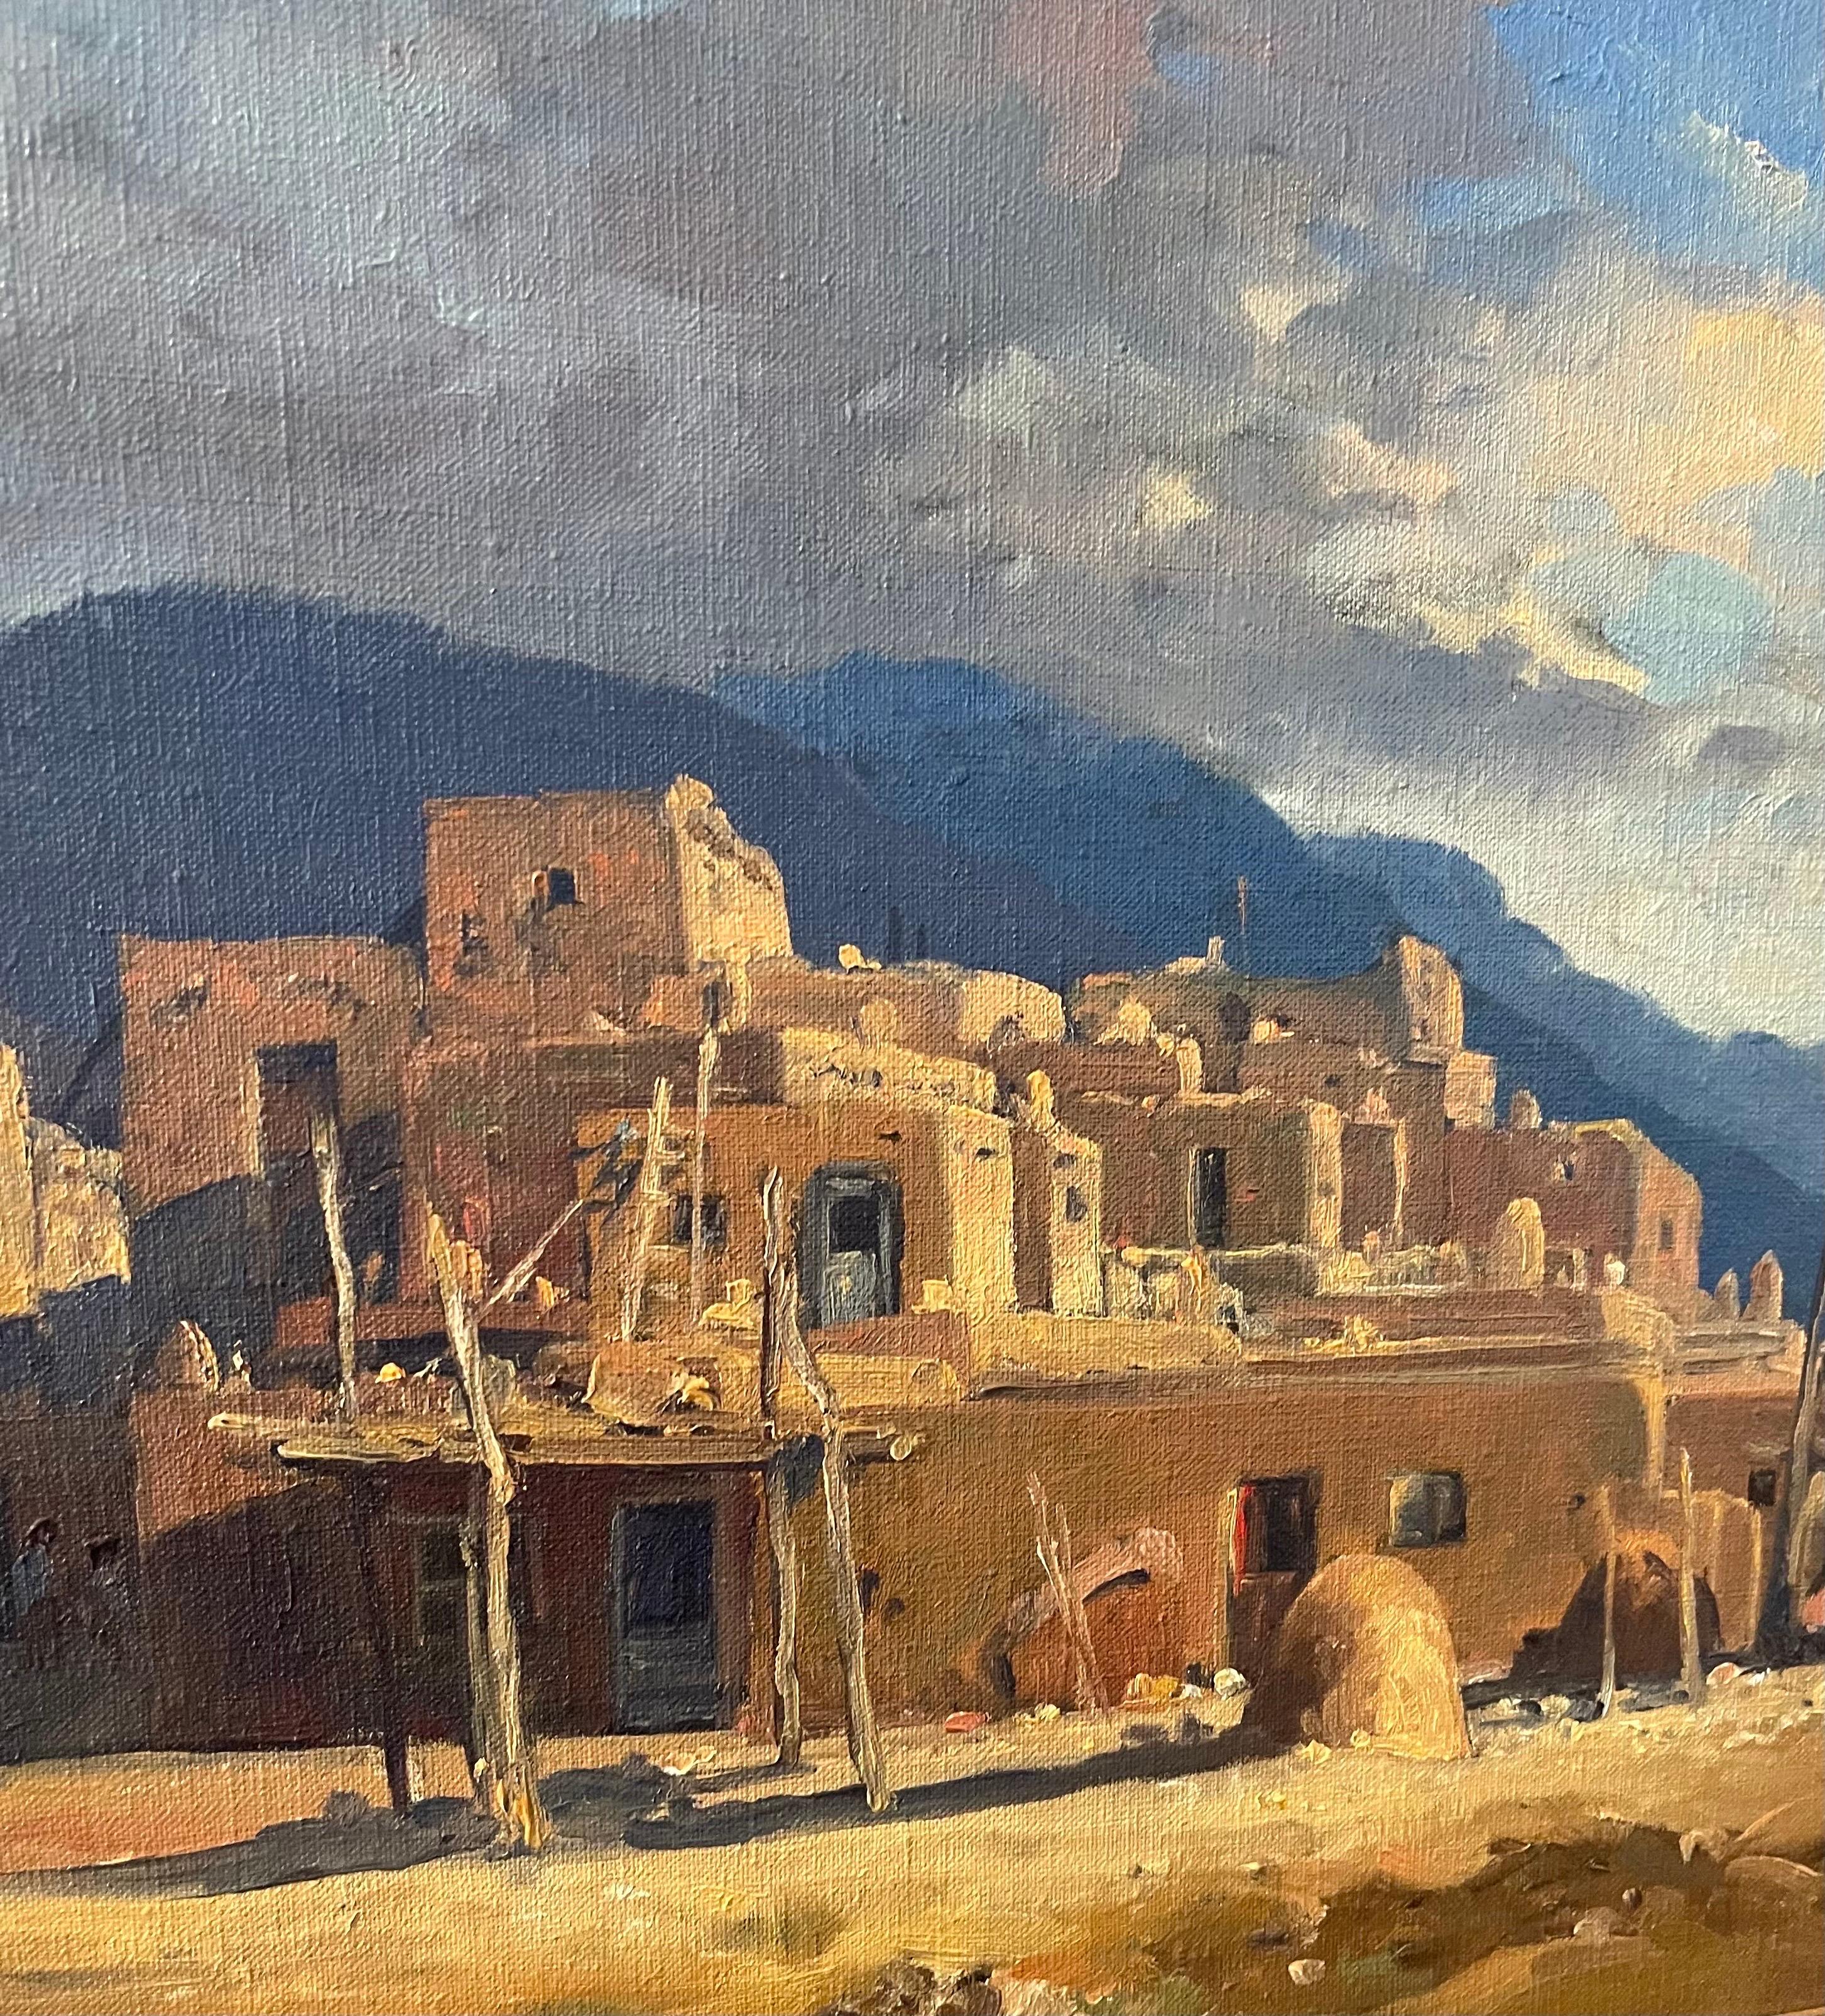 Gorgeous original oil on board pueblo landscape by listed artist Ralph Love, circa 1950s. This wonderful piece, which has photographic qualities, measures 23.5 x 19.5 framed and the painting itself is 17.5